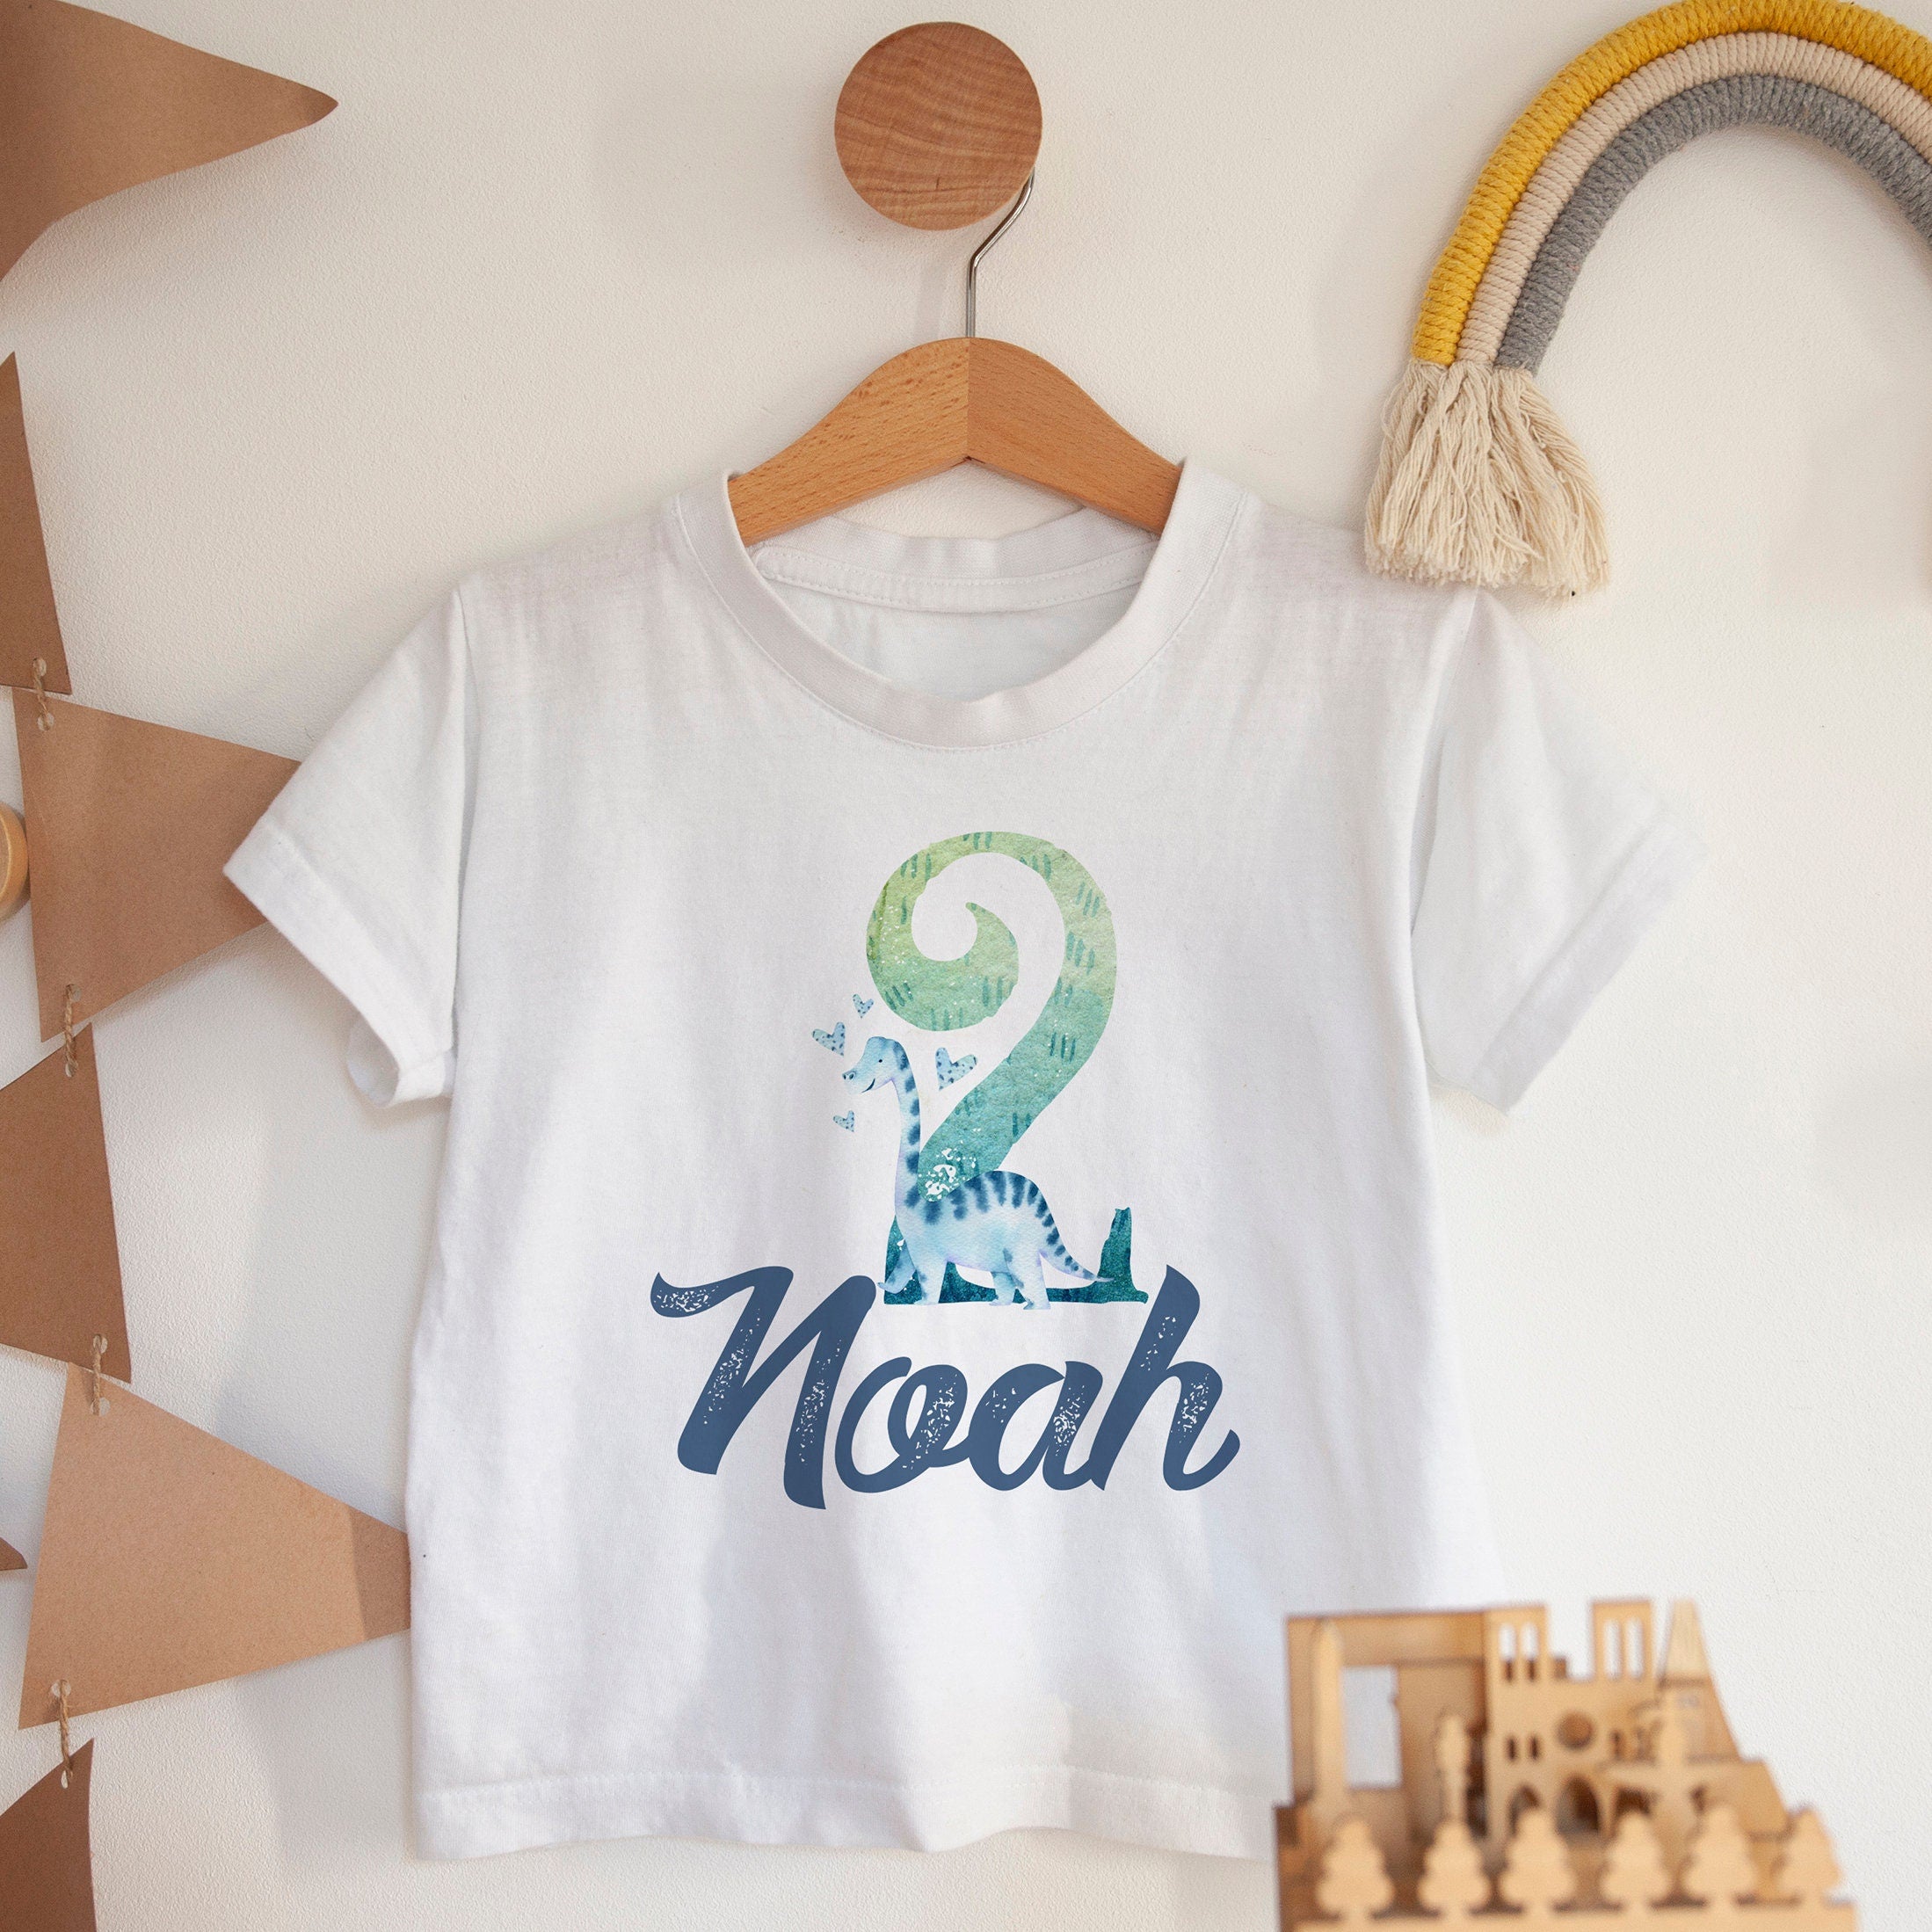 Personalised Dinosaur Kids Birthday T-Shirt, Pink Or Blue Options, Boy Girl Tshirt Top With Name